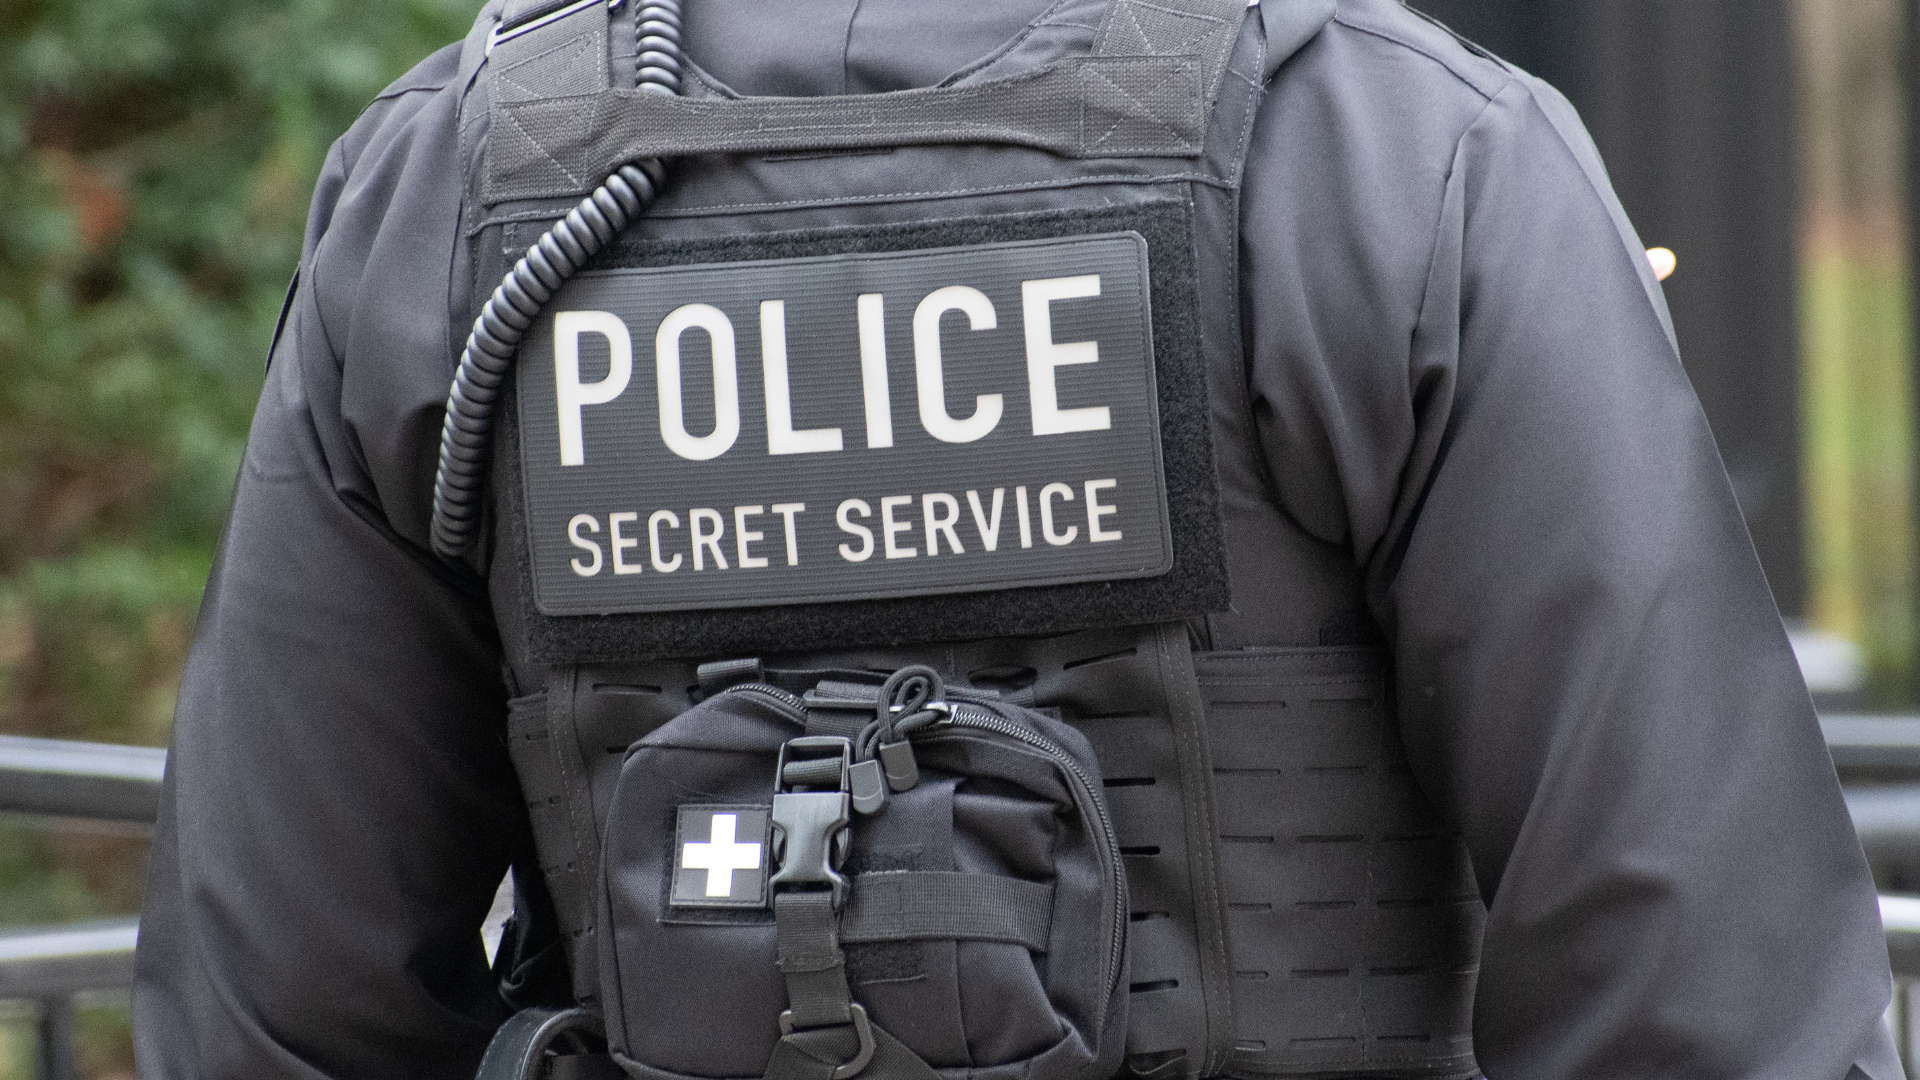 How to Protect Your Business Like a Secret Service Agent